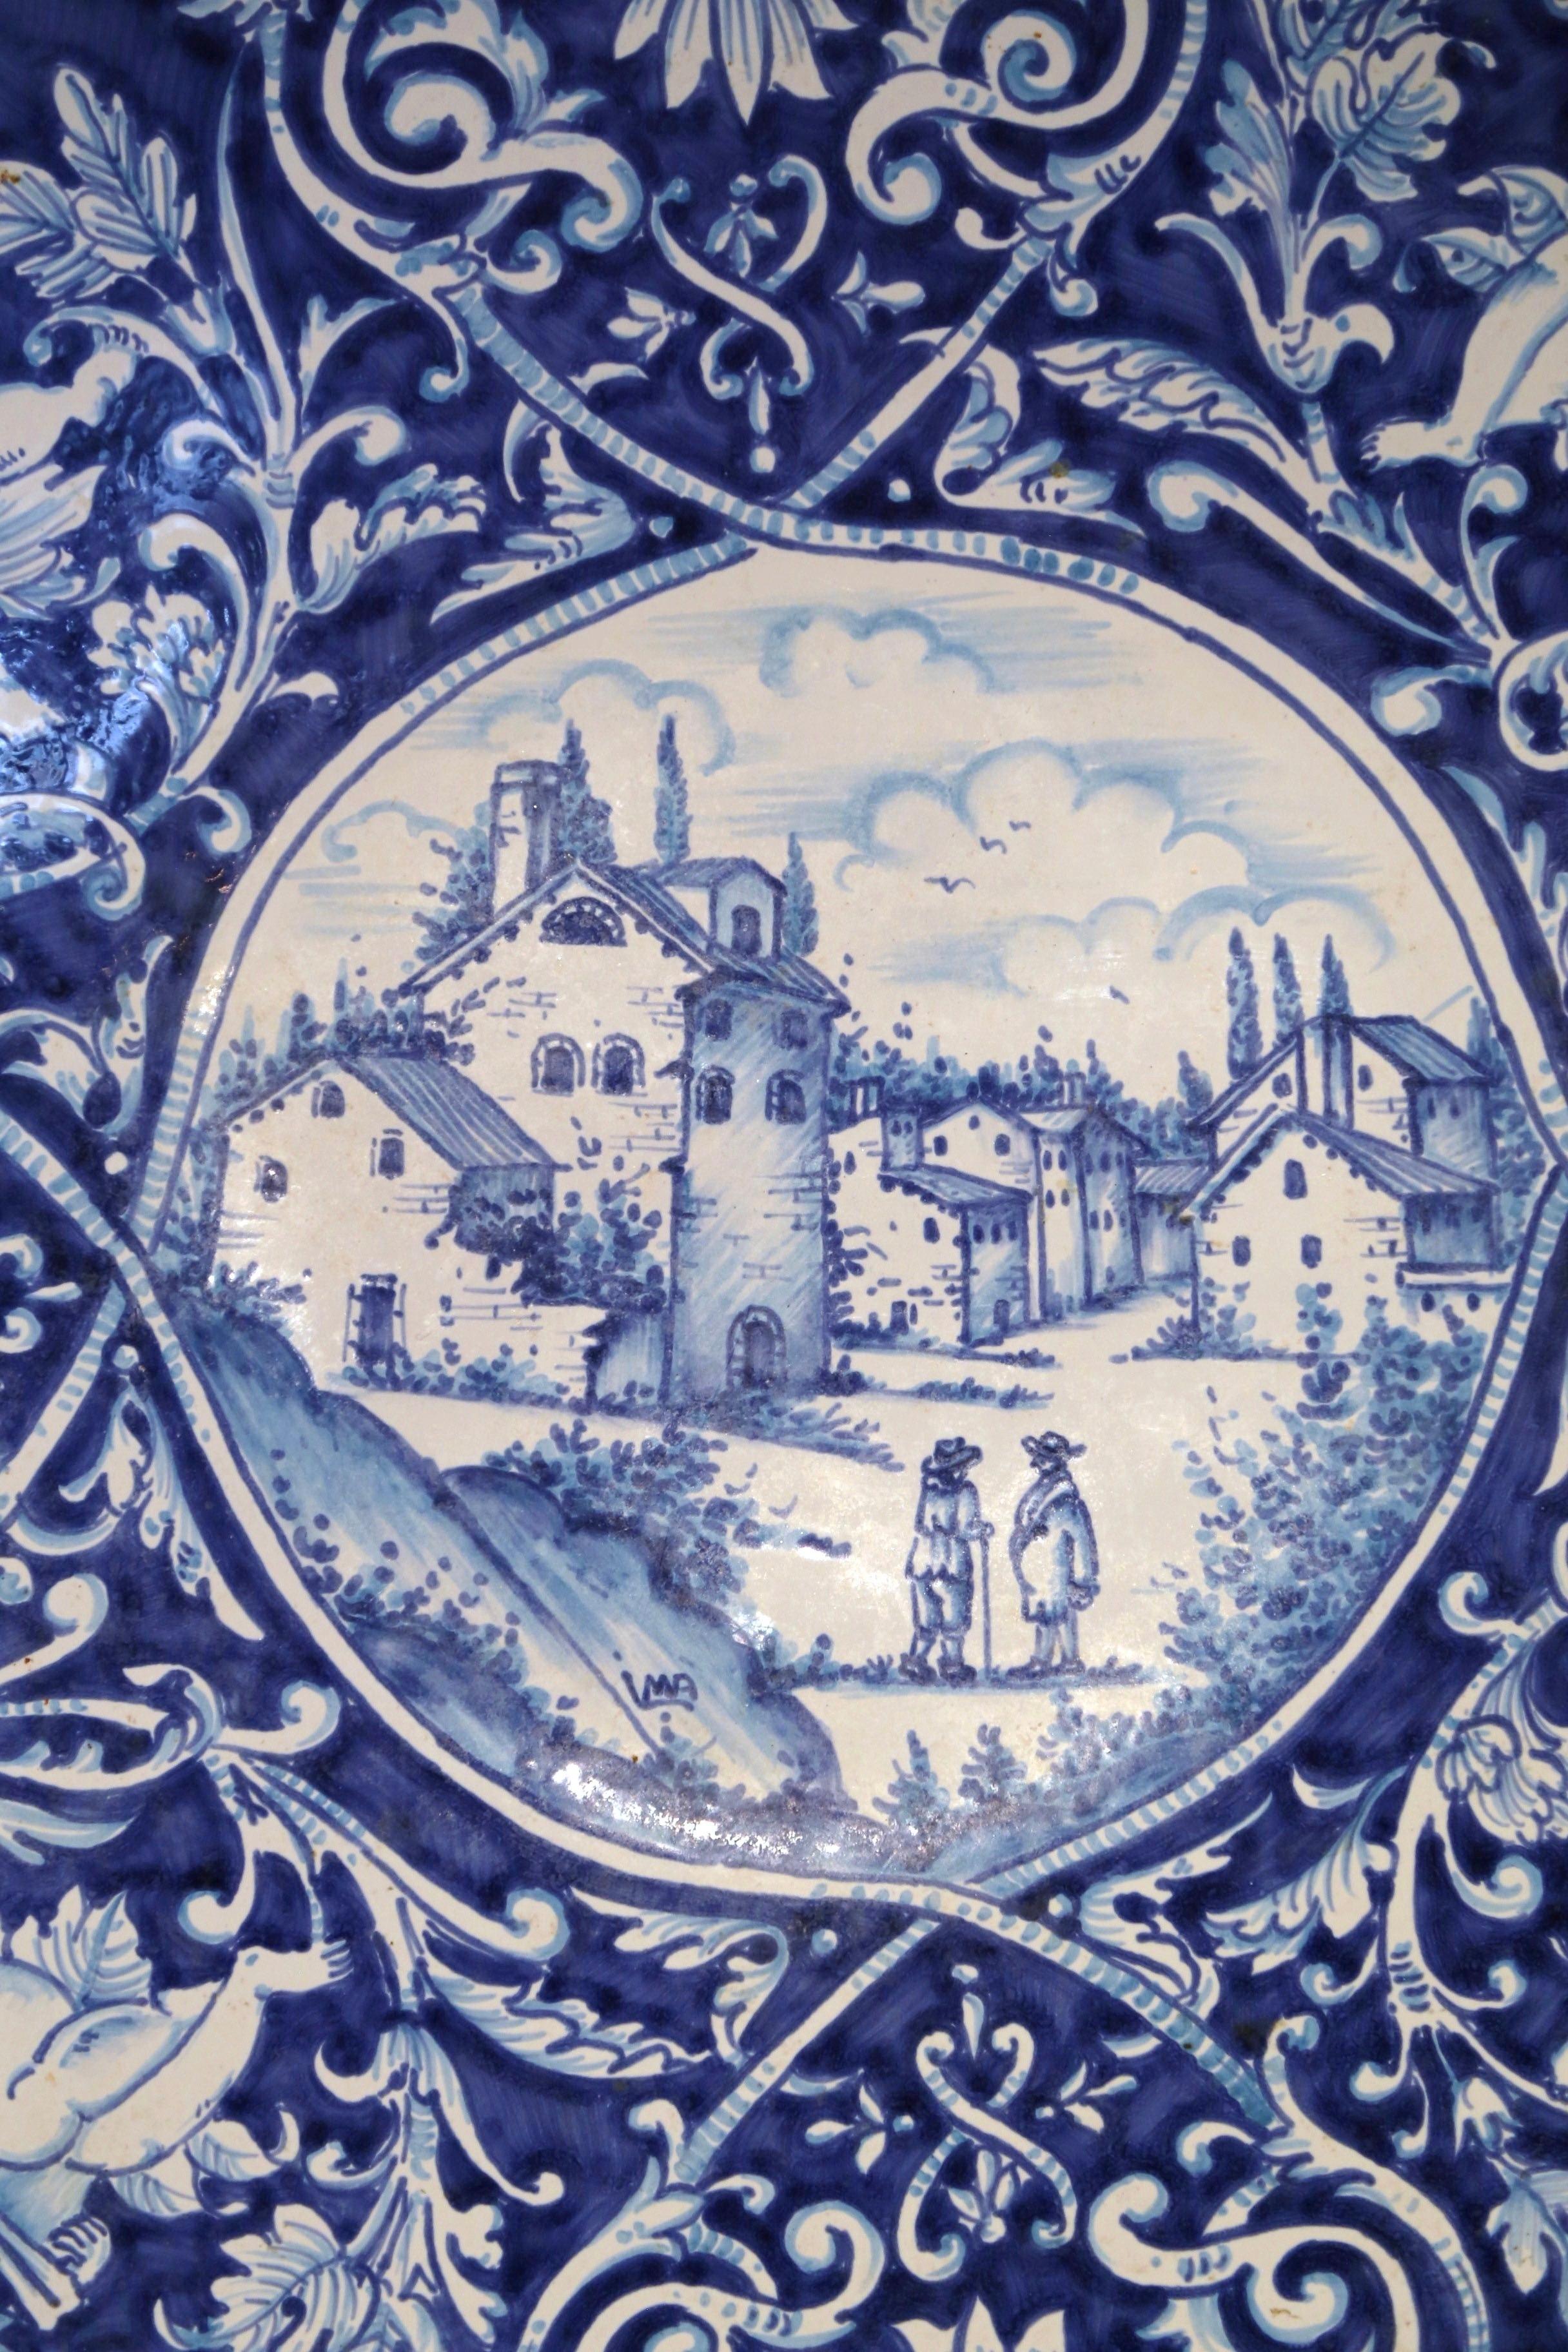 Hand-Crafted Mid-Century Italian Hand Painted Blue and White Faience Platter Delft Style For Sale